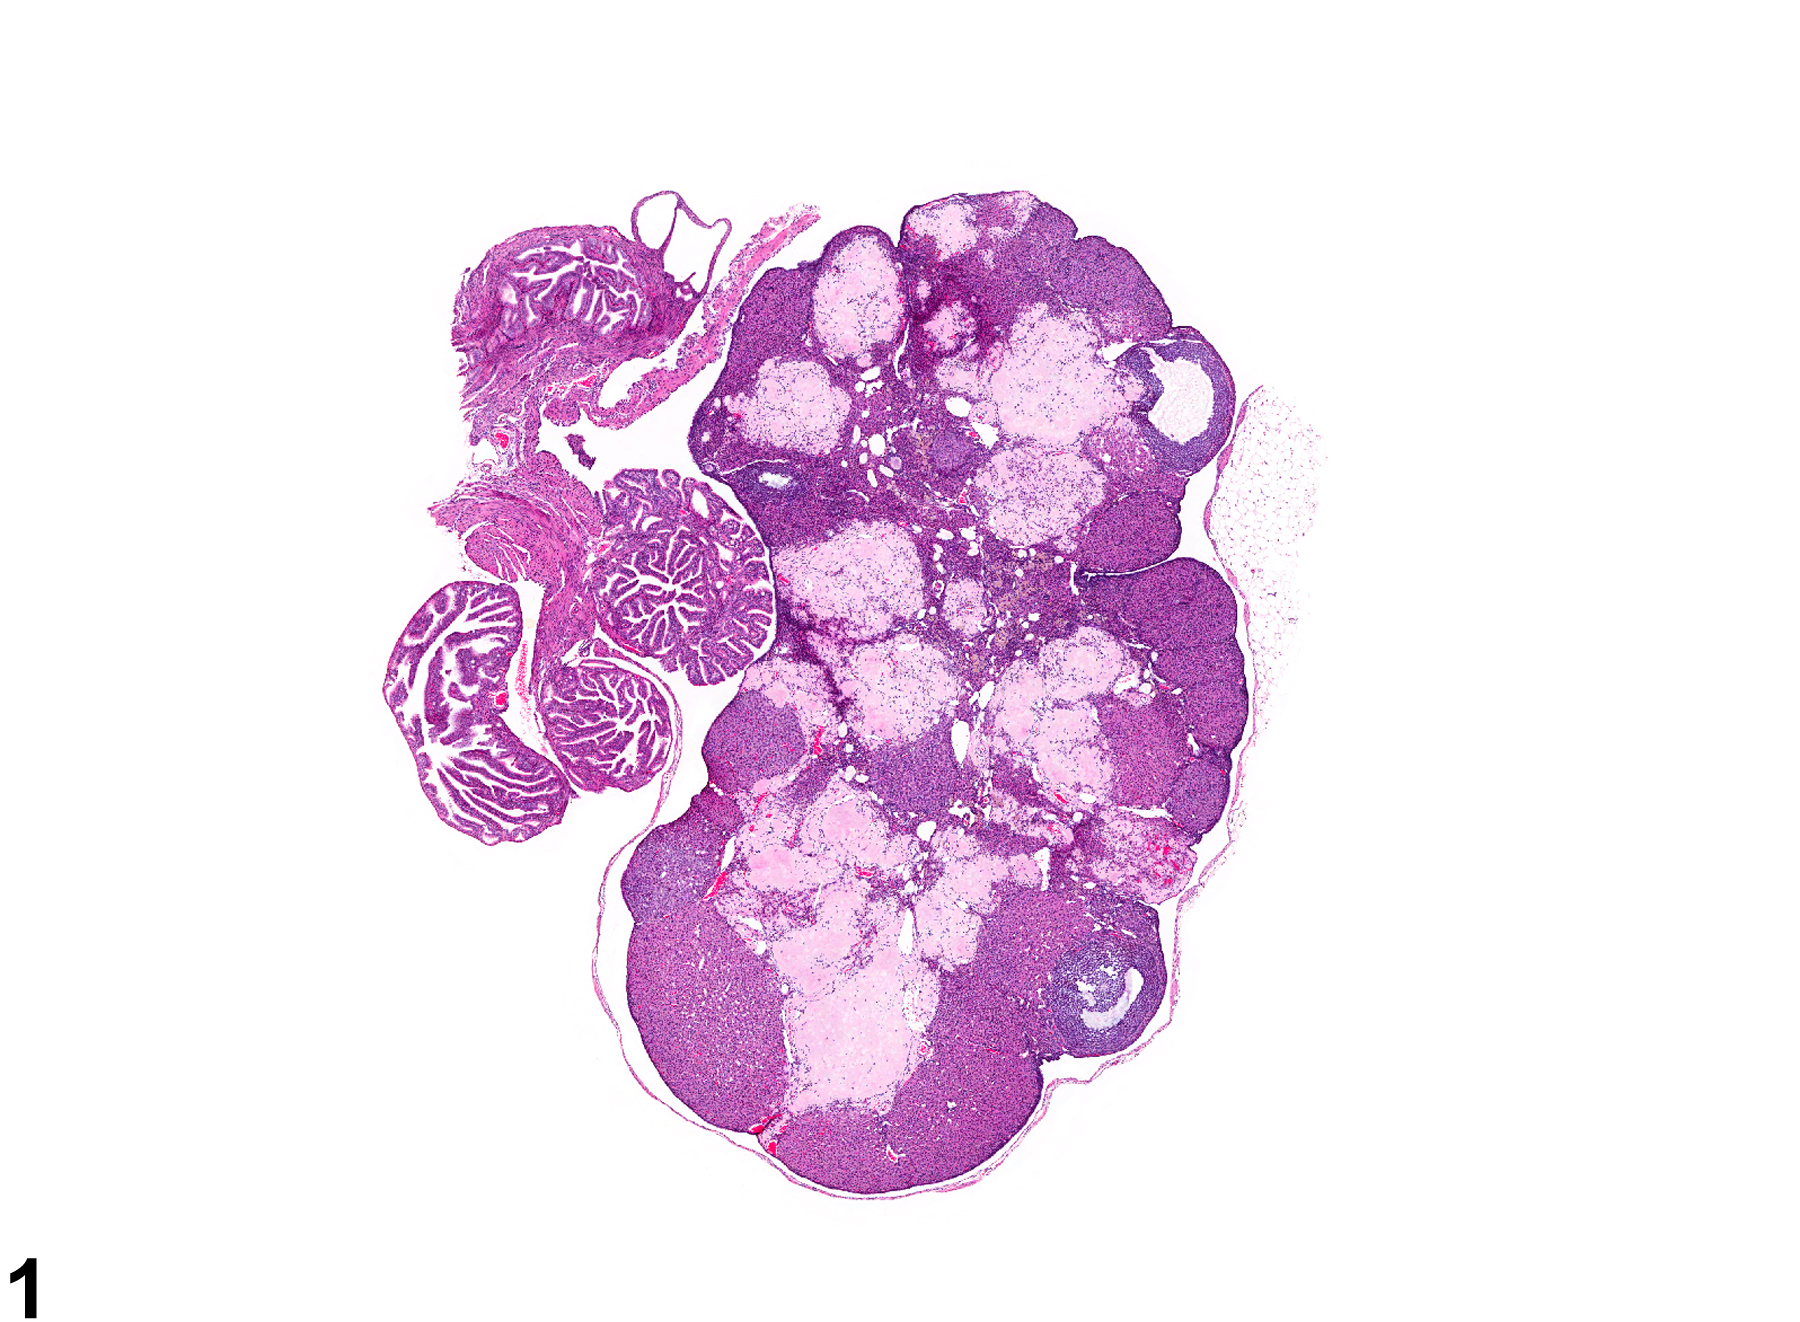 Image of amyloid in the ovary from a female Swiss CD-1 mouse in a chronic study